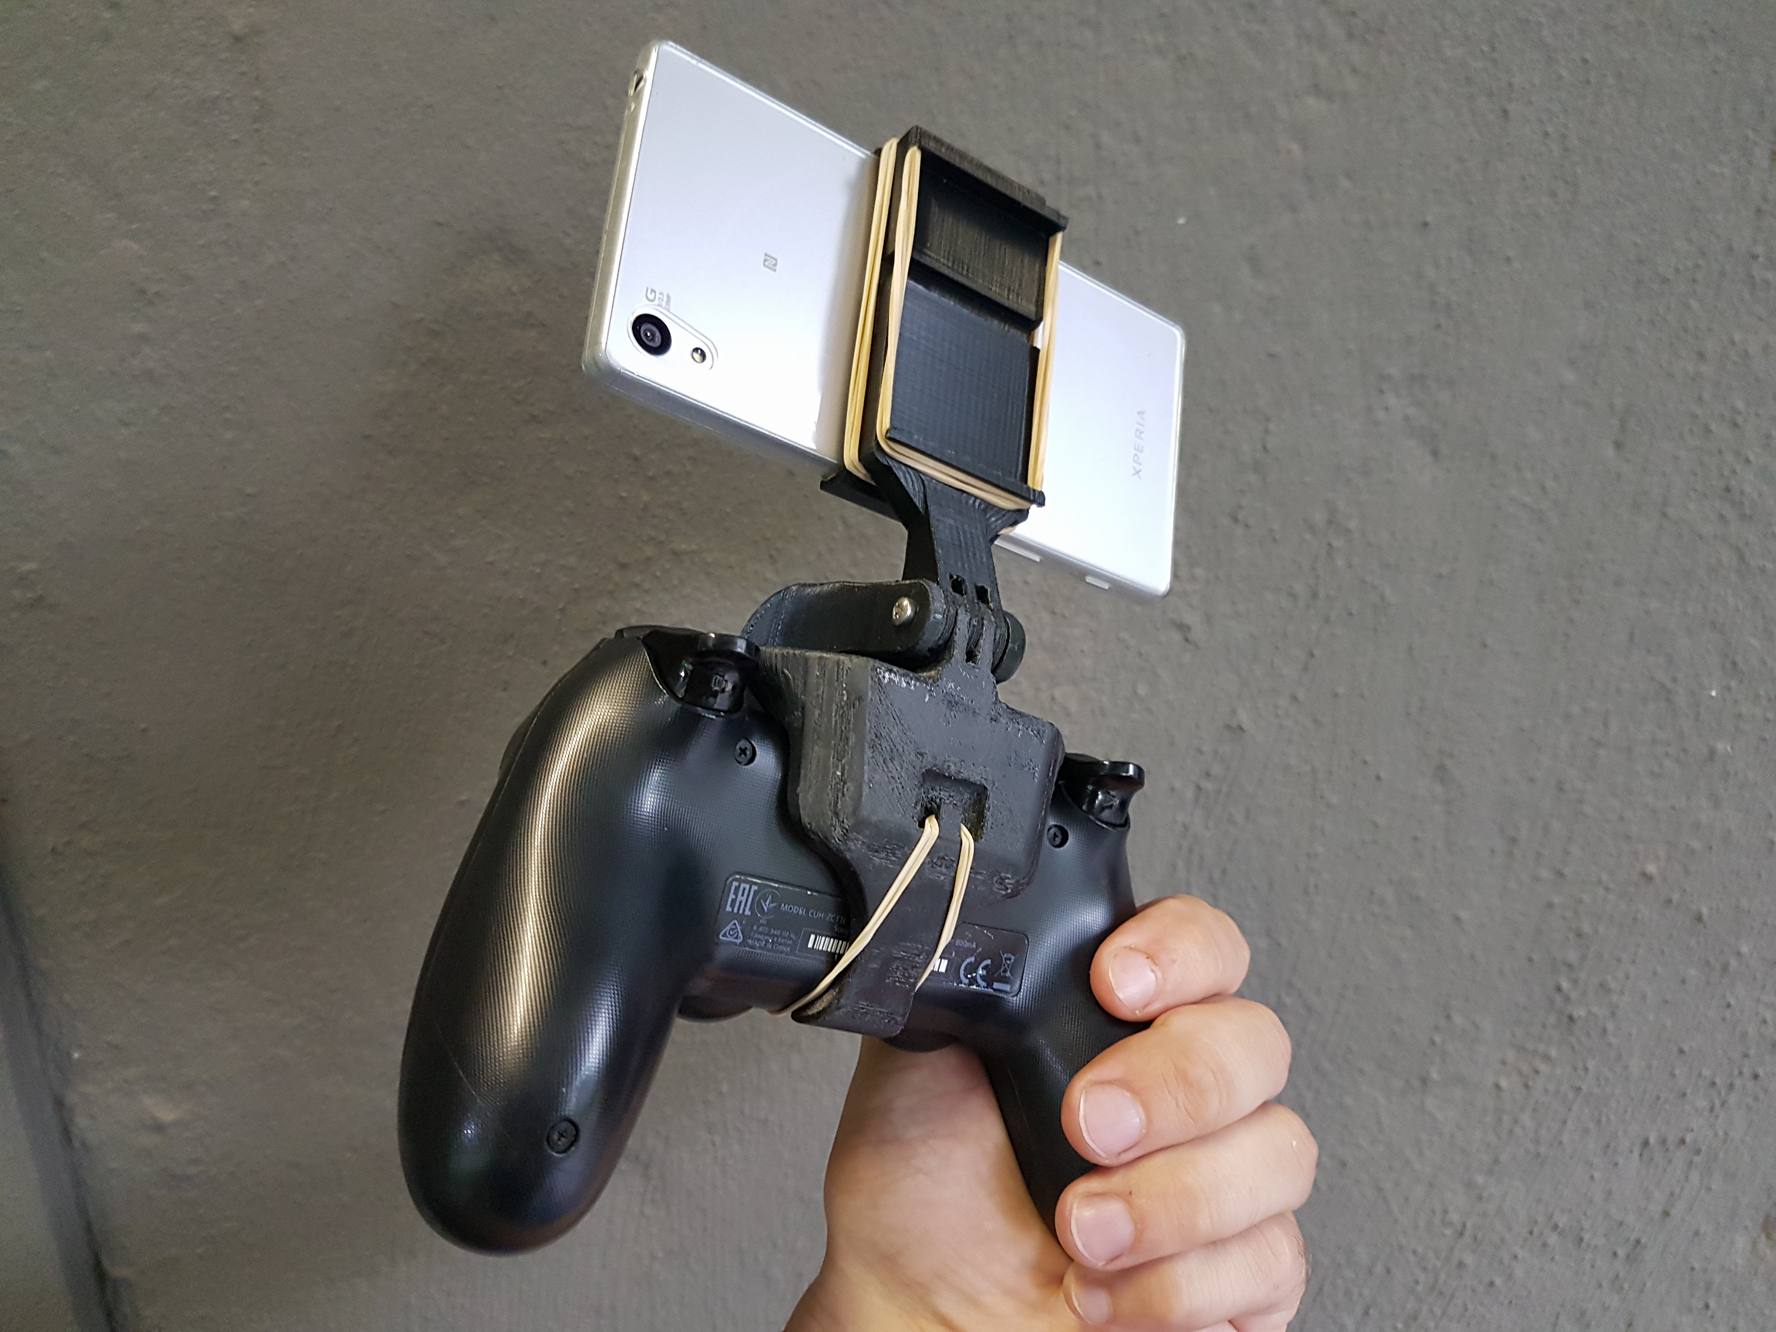 ps4 phone controller mount